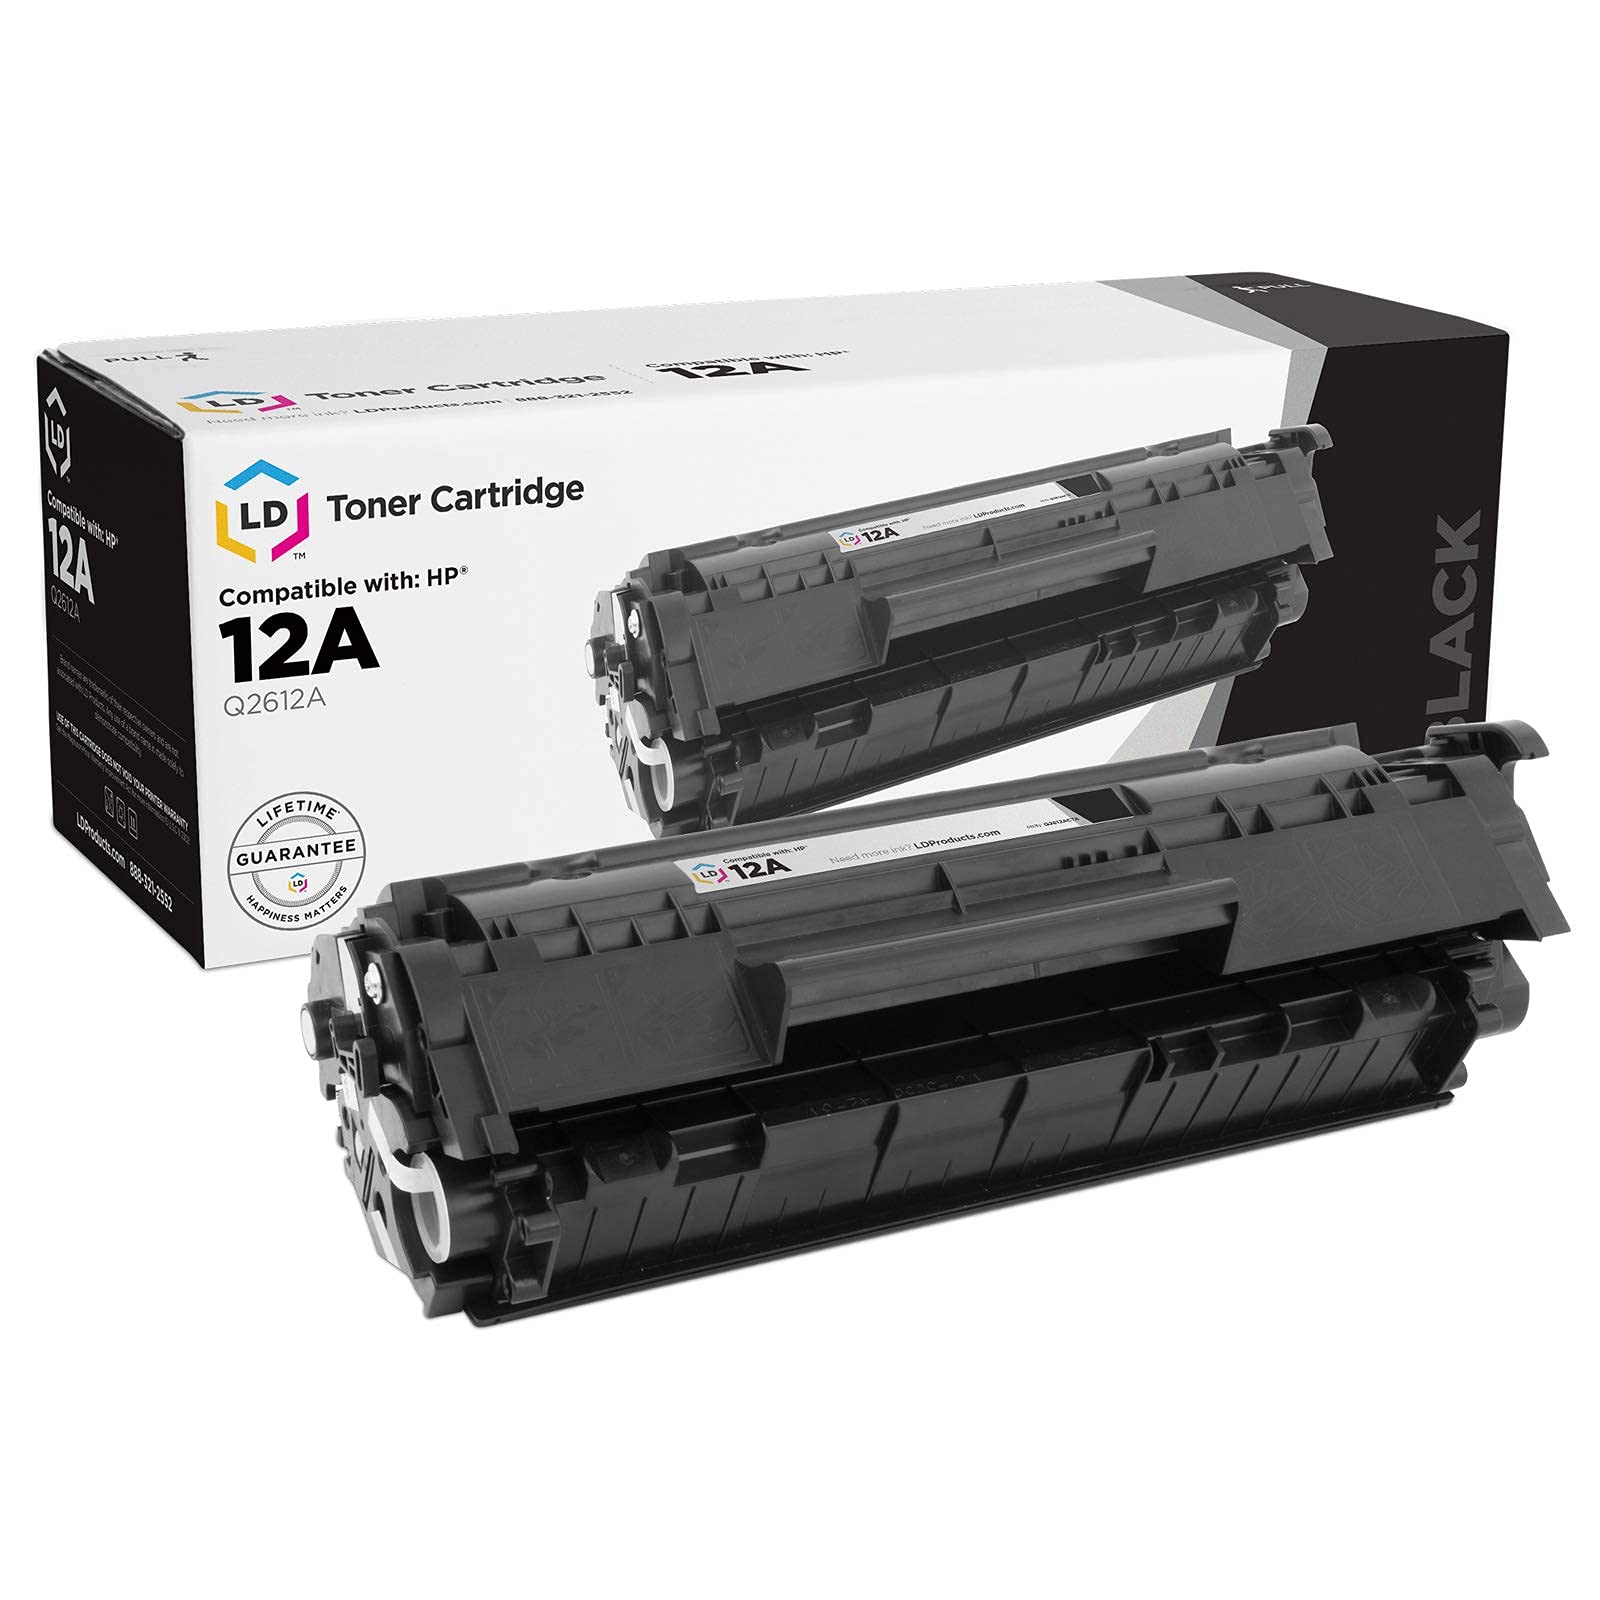 14 Superior Ld Printer Ink for 2023